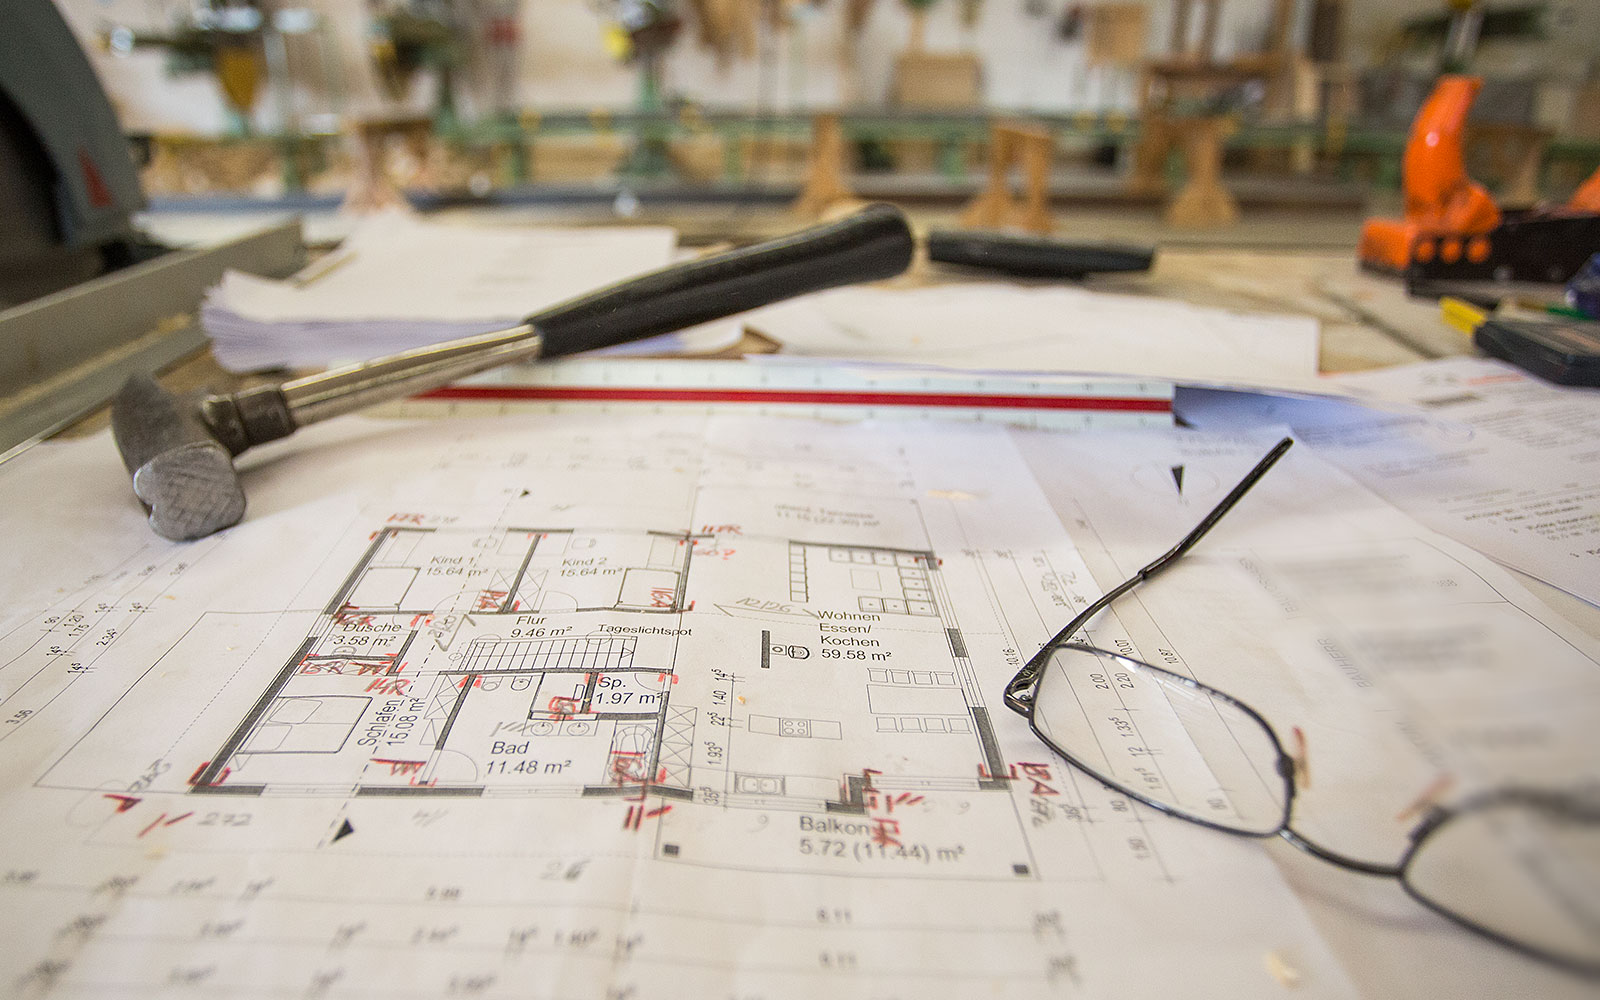 Planning according to specification and requirement